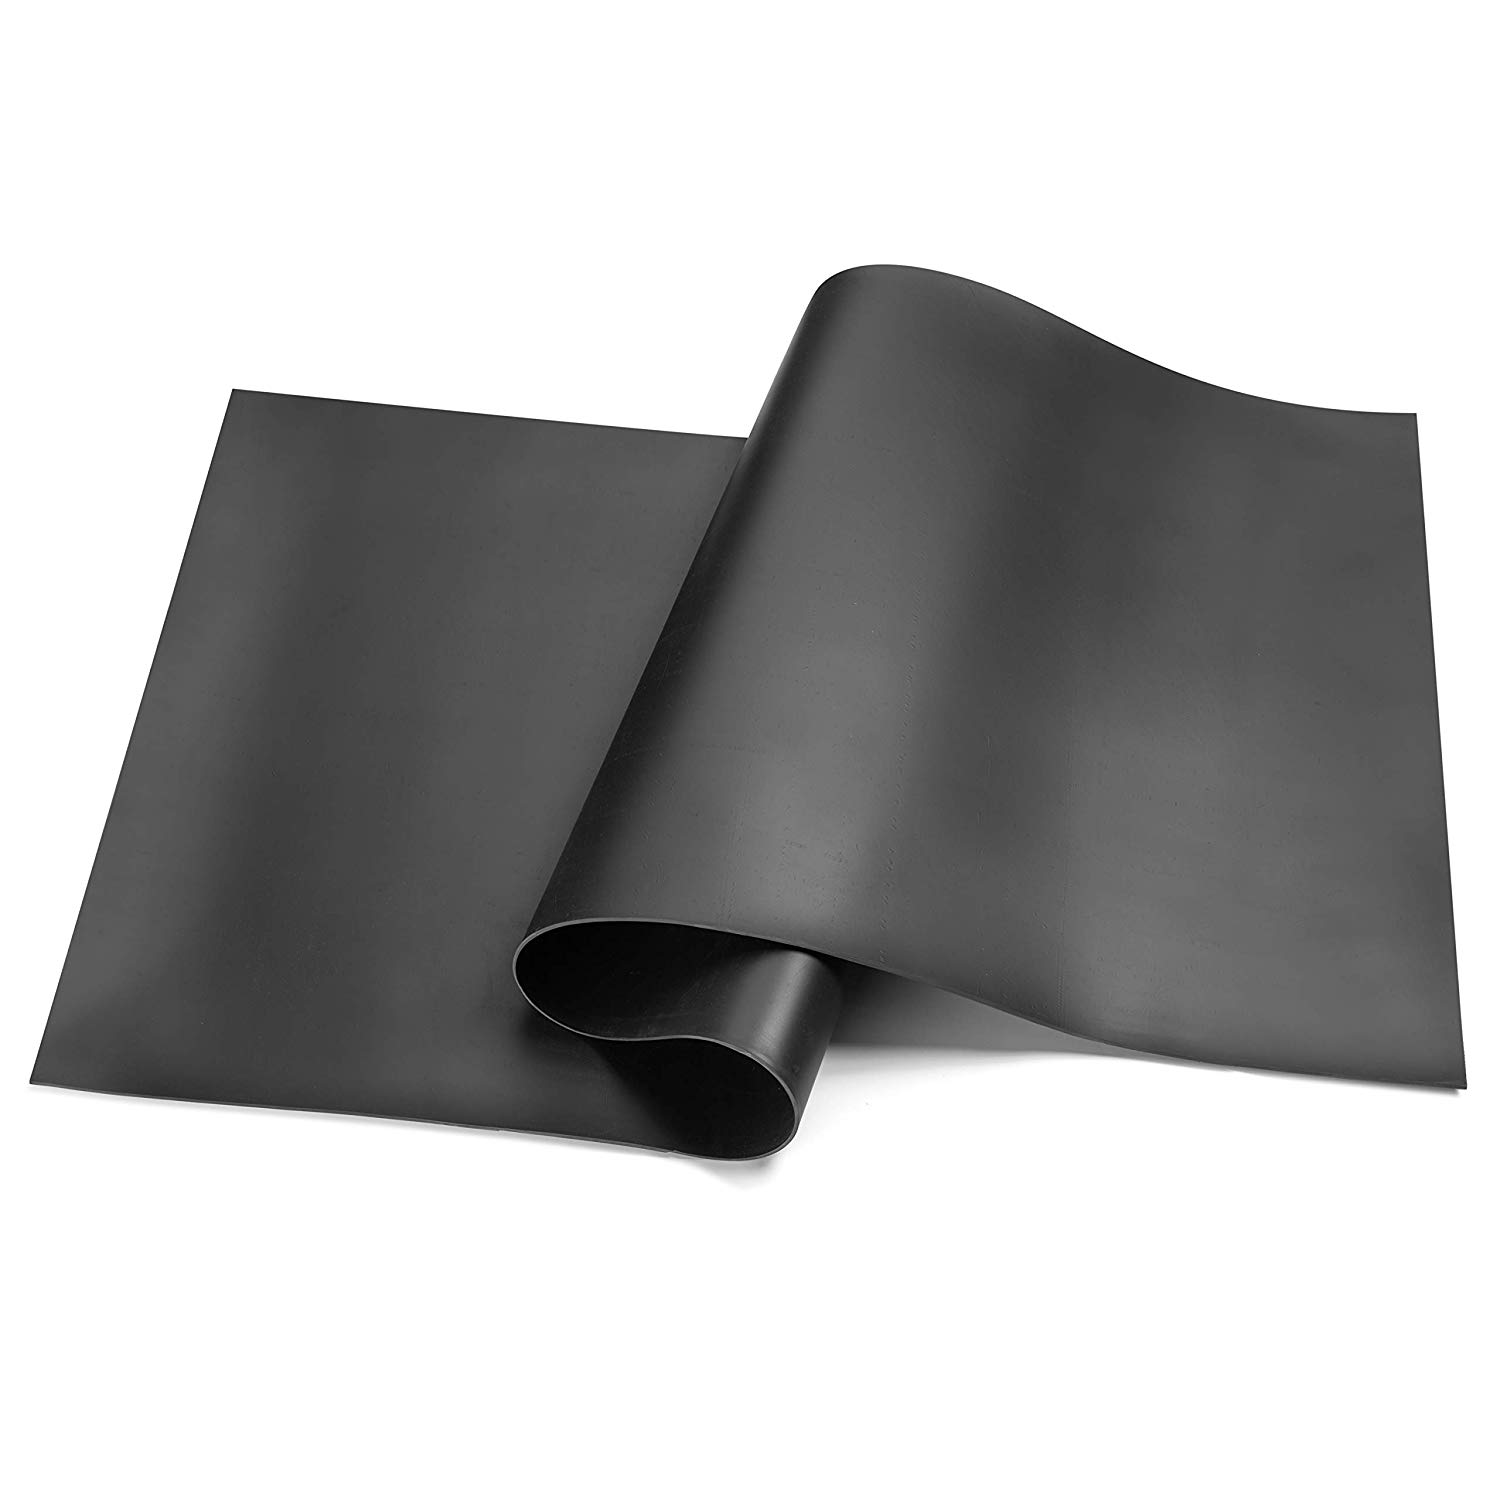 Mass Loaded Vinyl - Acoustical Solutions